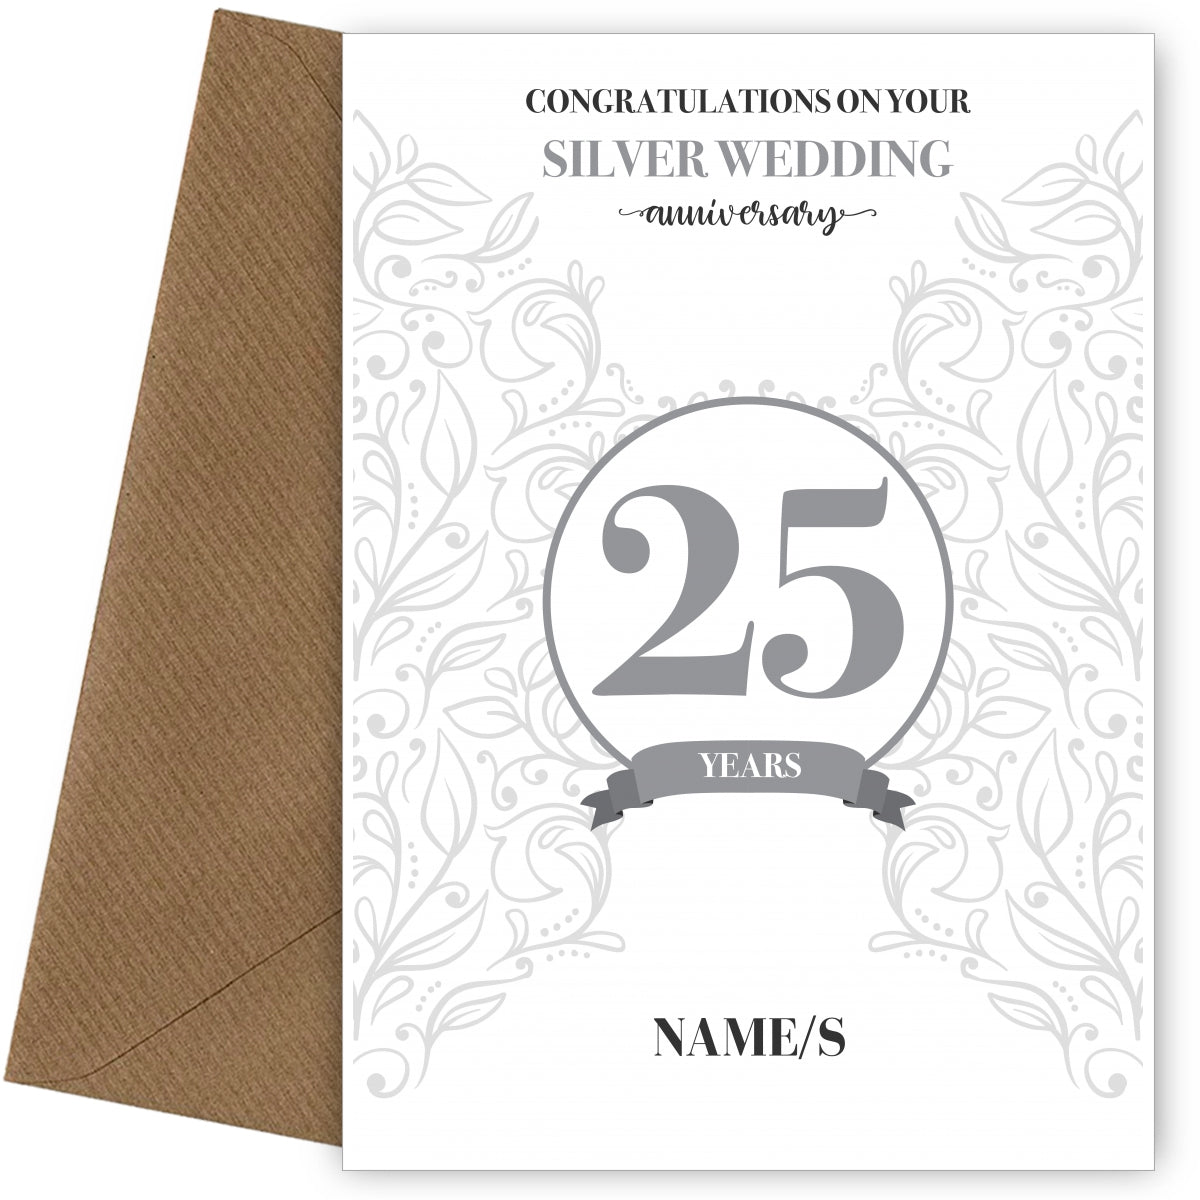 Personalised 25th Anniversary Card (Silver Wedding Anniversary)